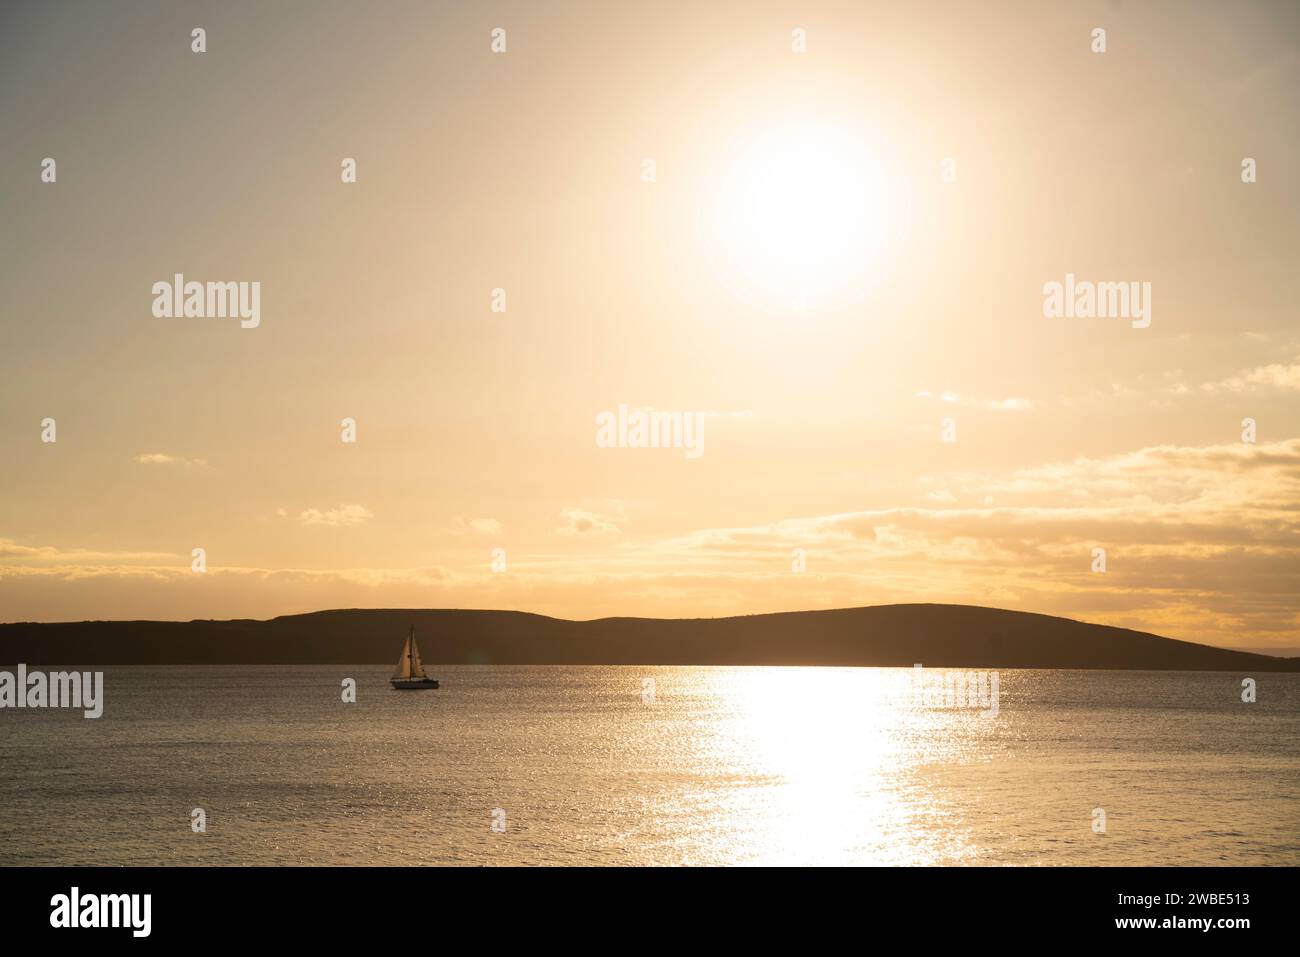 A sailing boat sails across the bay of Weston-super-Mare, North Somerset with Brean Down in the background at sunset. Stock Photo